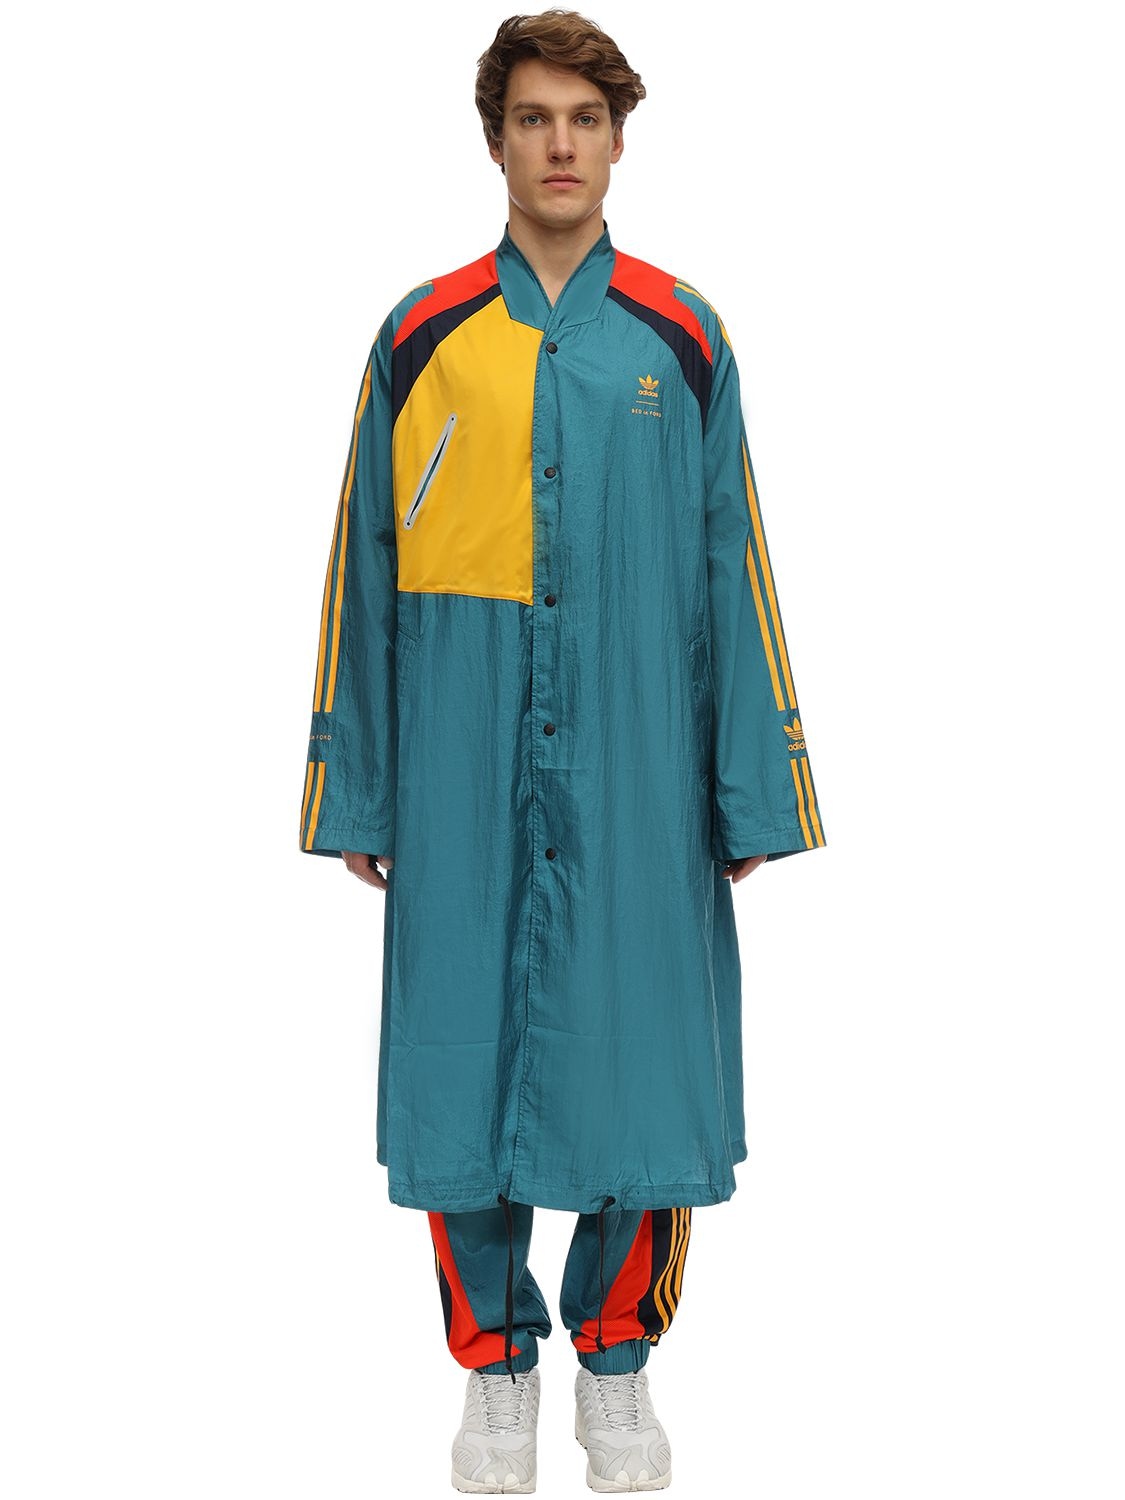 Adidas Originals Statement Bed J.w. Ford Long Coat In Rich Green